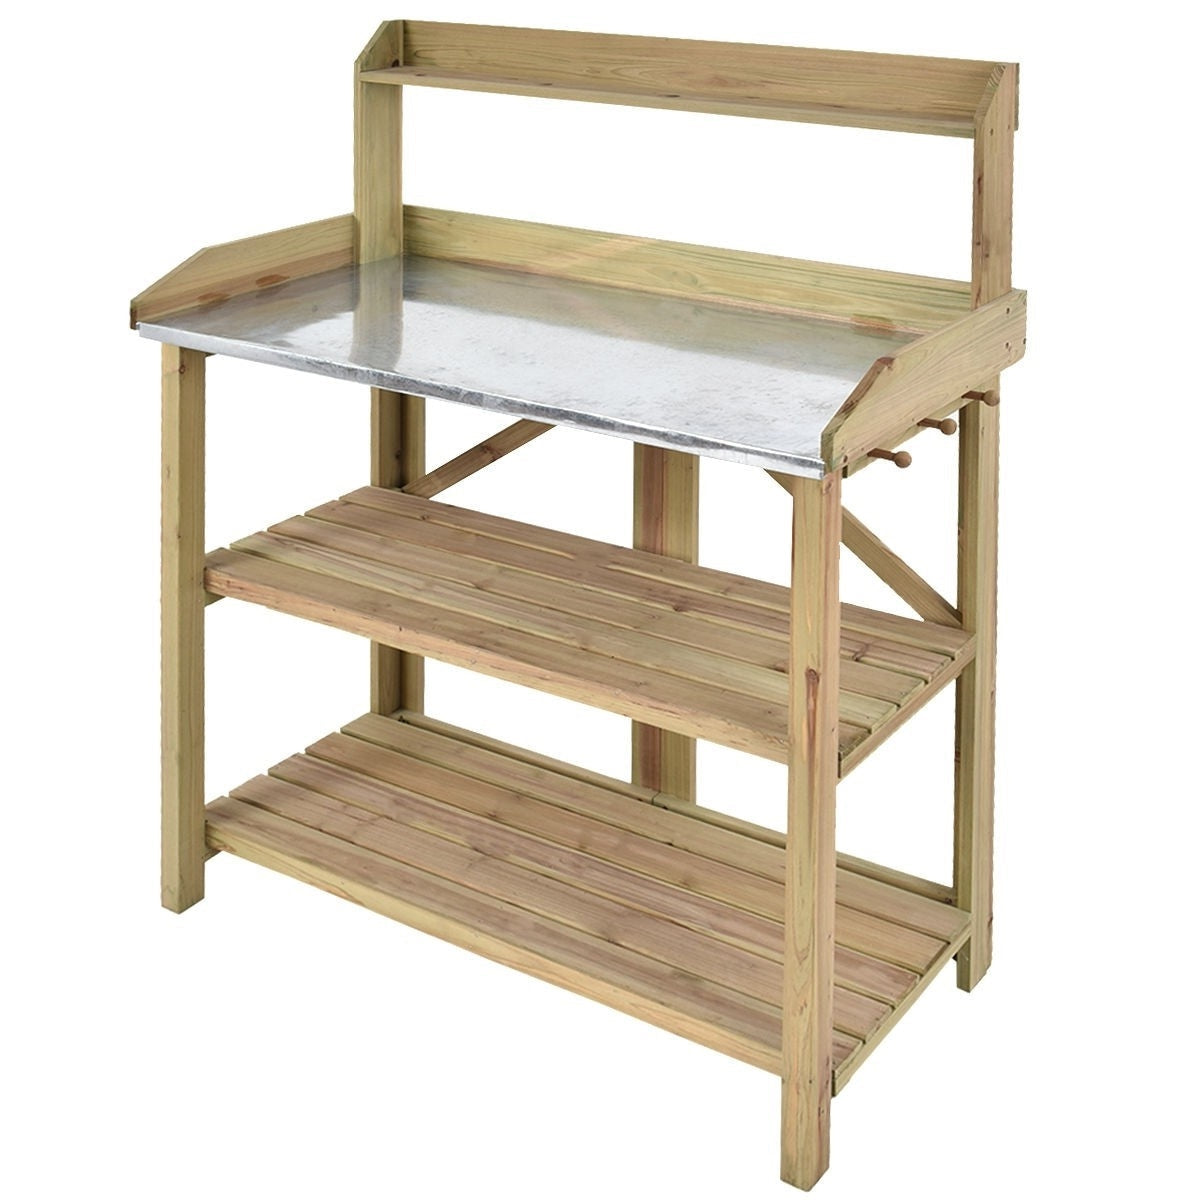 Outdoor > Gardening > Potting Benches - Outdoor Garden Workstation Potting Bench With Metal Top